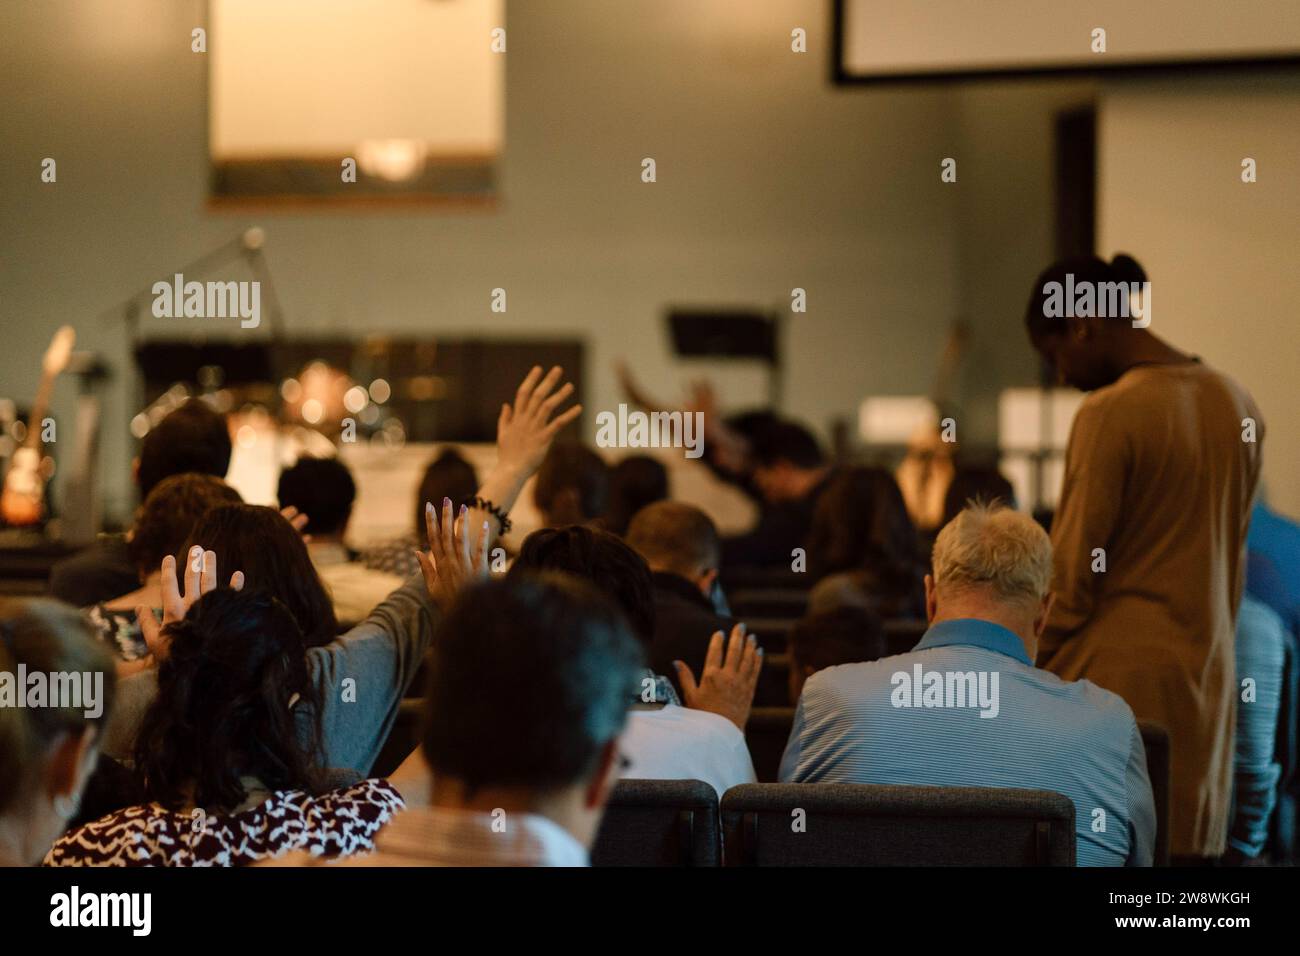 Raised hands in church service Stock Photo